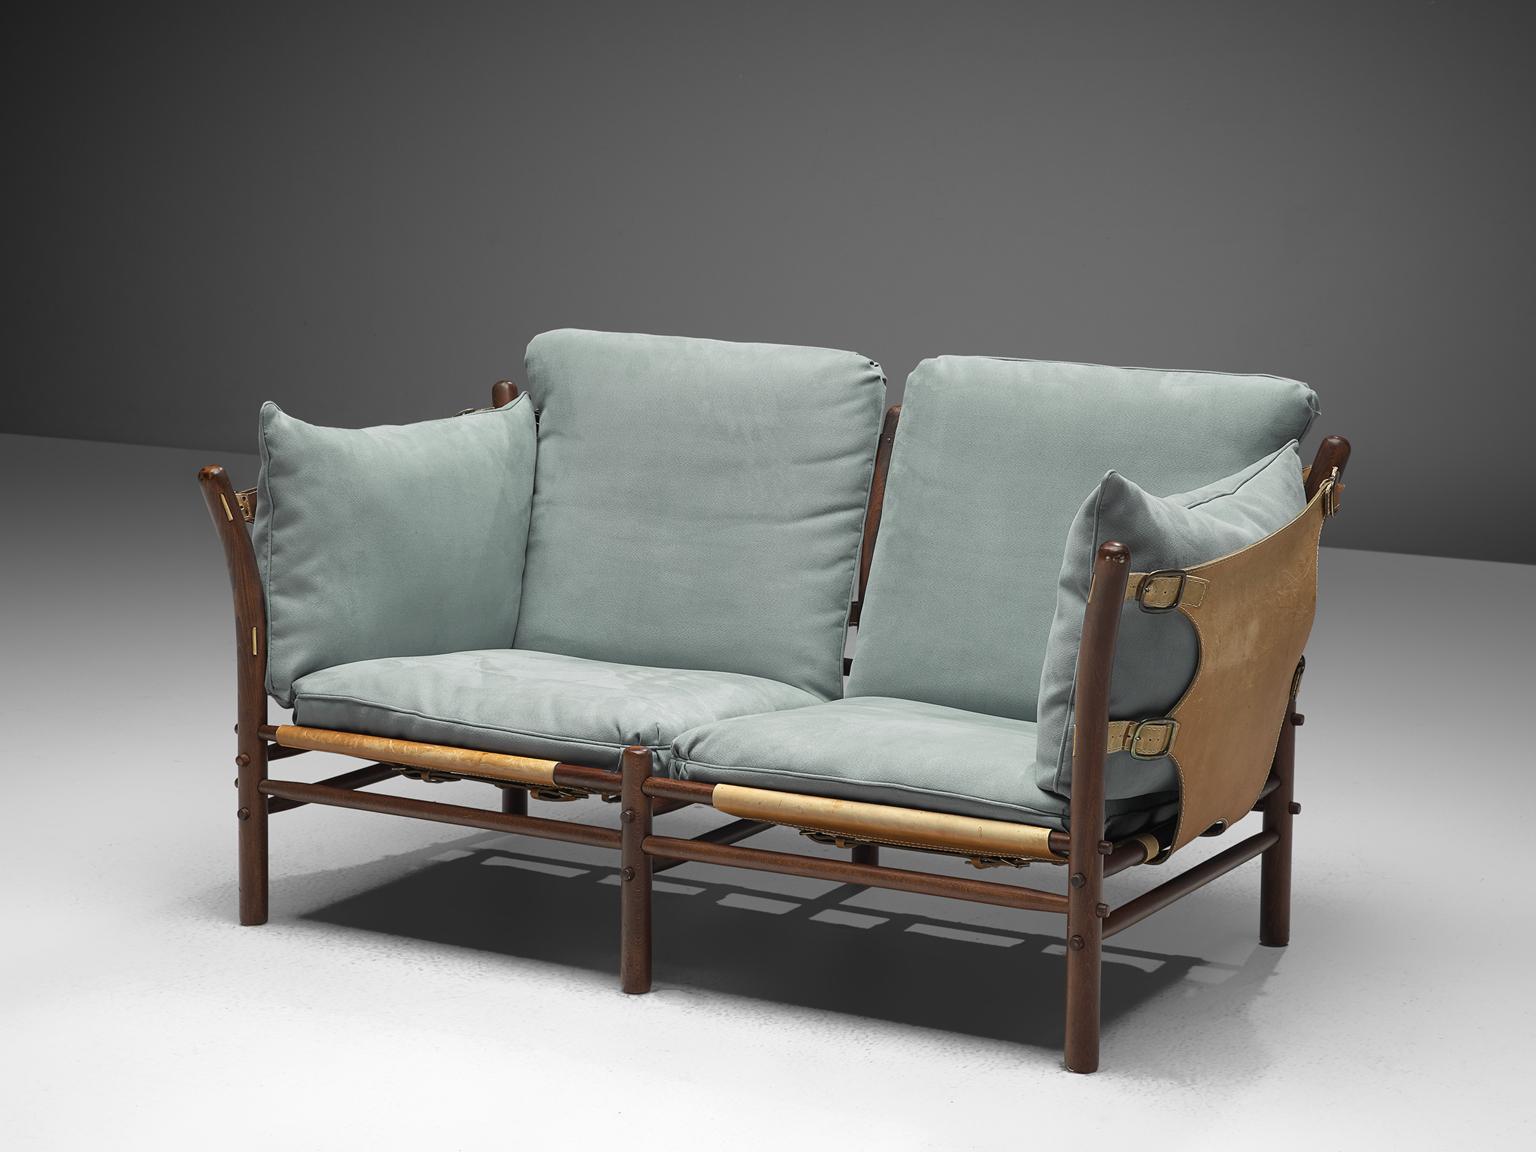 Arne Norell for Norell Möbel, two-seat 'Ilona' sofa, buffalo leather, fabric and beech, Sweden, 1970s.

Swedish two-seat sofa designed by Arne Norell in the 1970s. Beautiful thick buffalo leather is spanned to the beech frame to create the